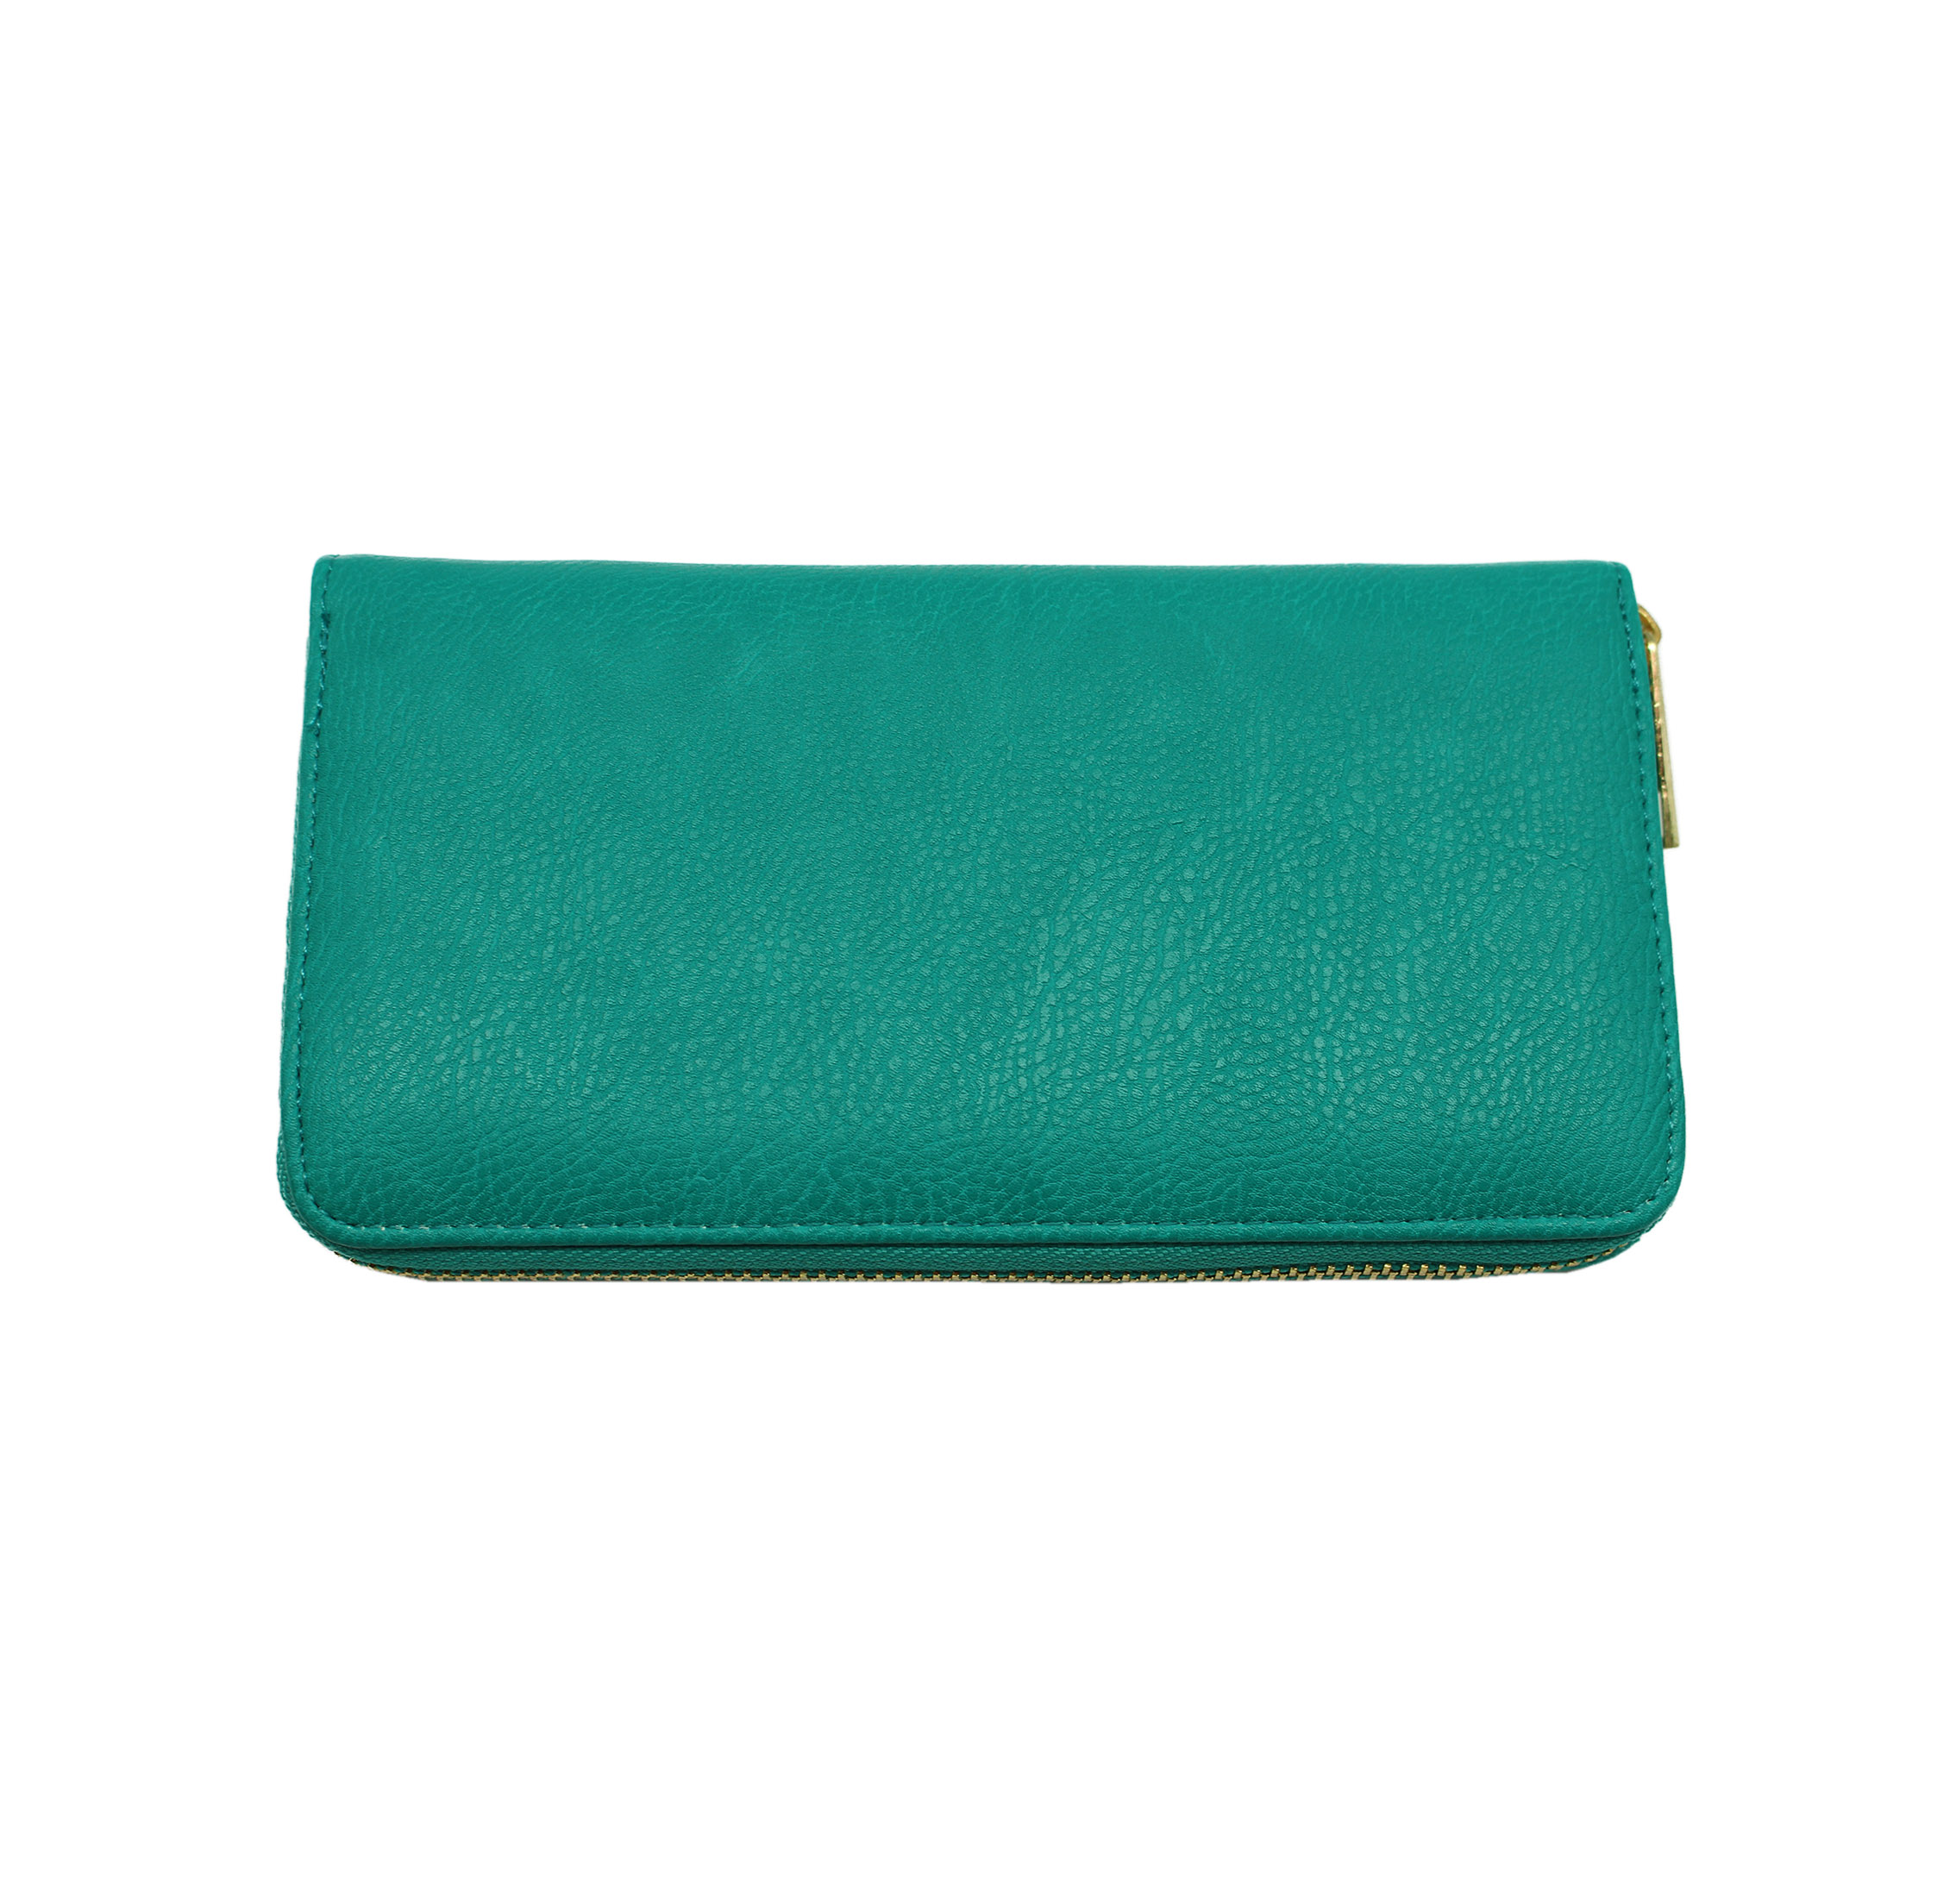 Simply Handy Wallet - Best of Everything | Online Shopping